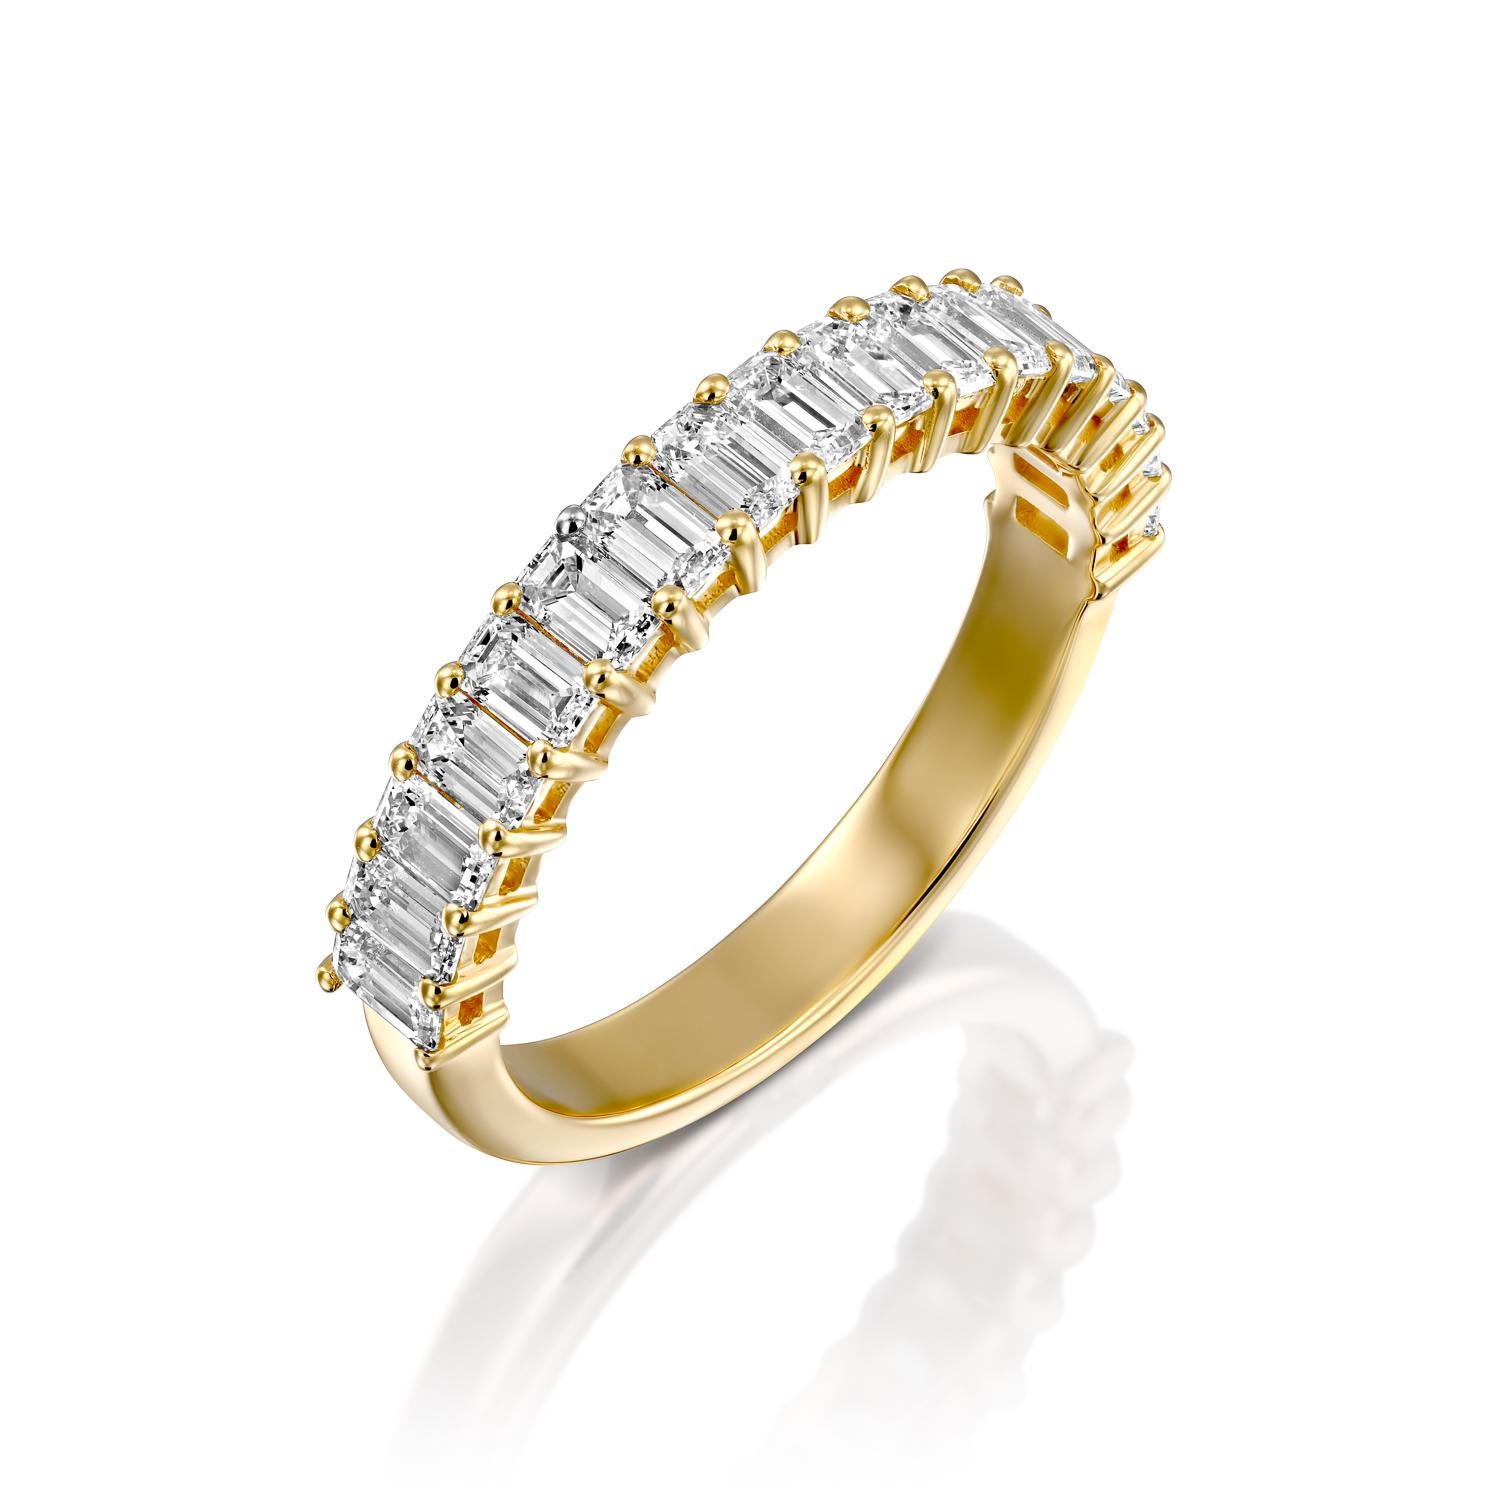 Stunning 3 carat certified diamond low set 18K yellow gold bar set band setting. Band features 17 emerald cut, 100% eye clean natural diamonds of F-G color and VS2-SI1 clarity. The ring is meticulously handcrafted with great care and attention to